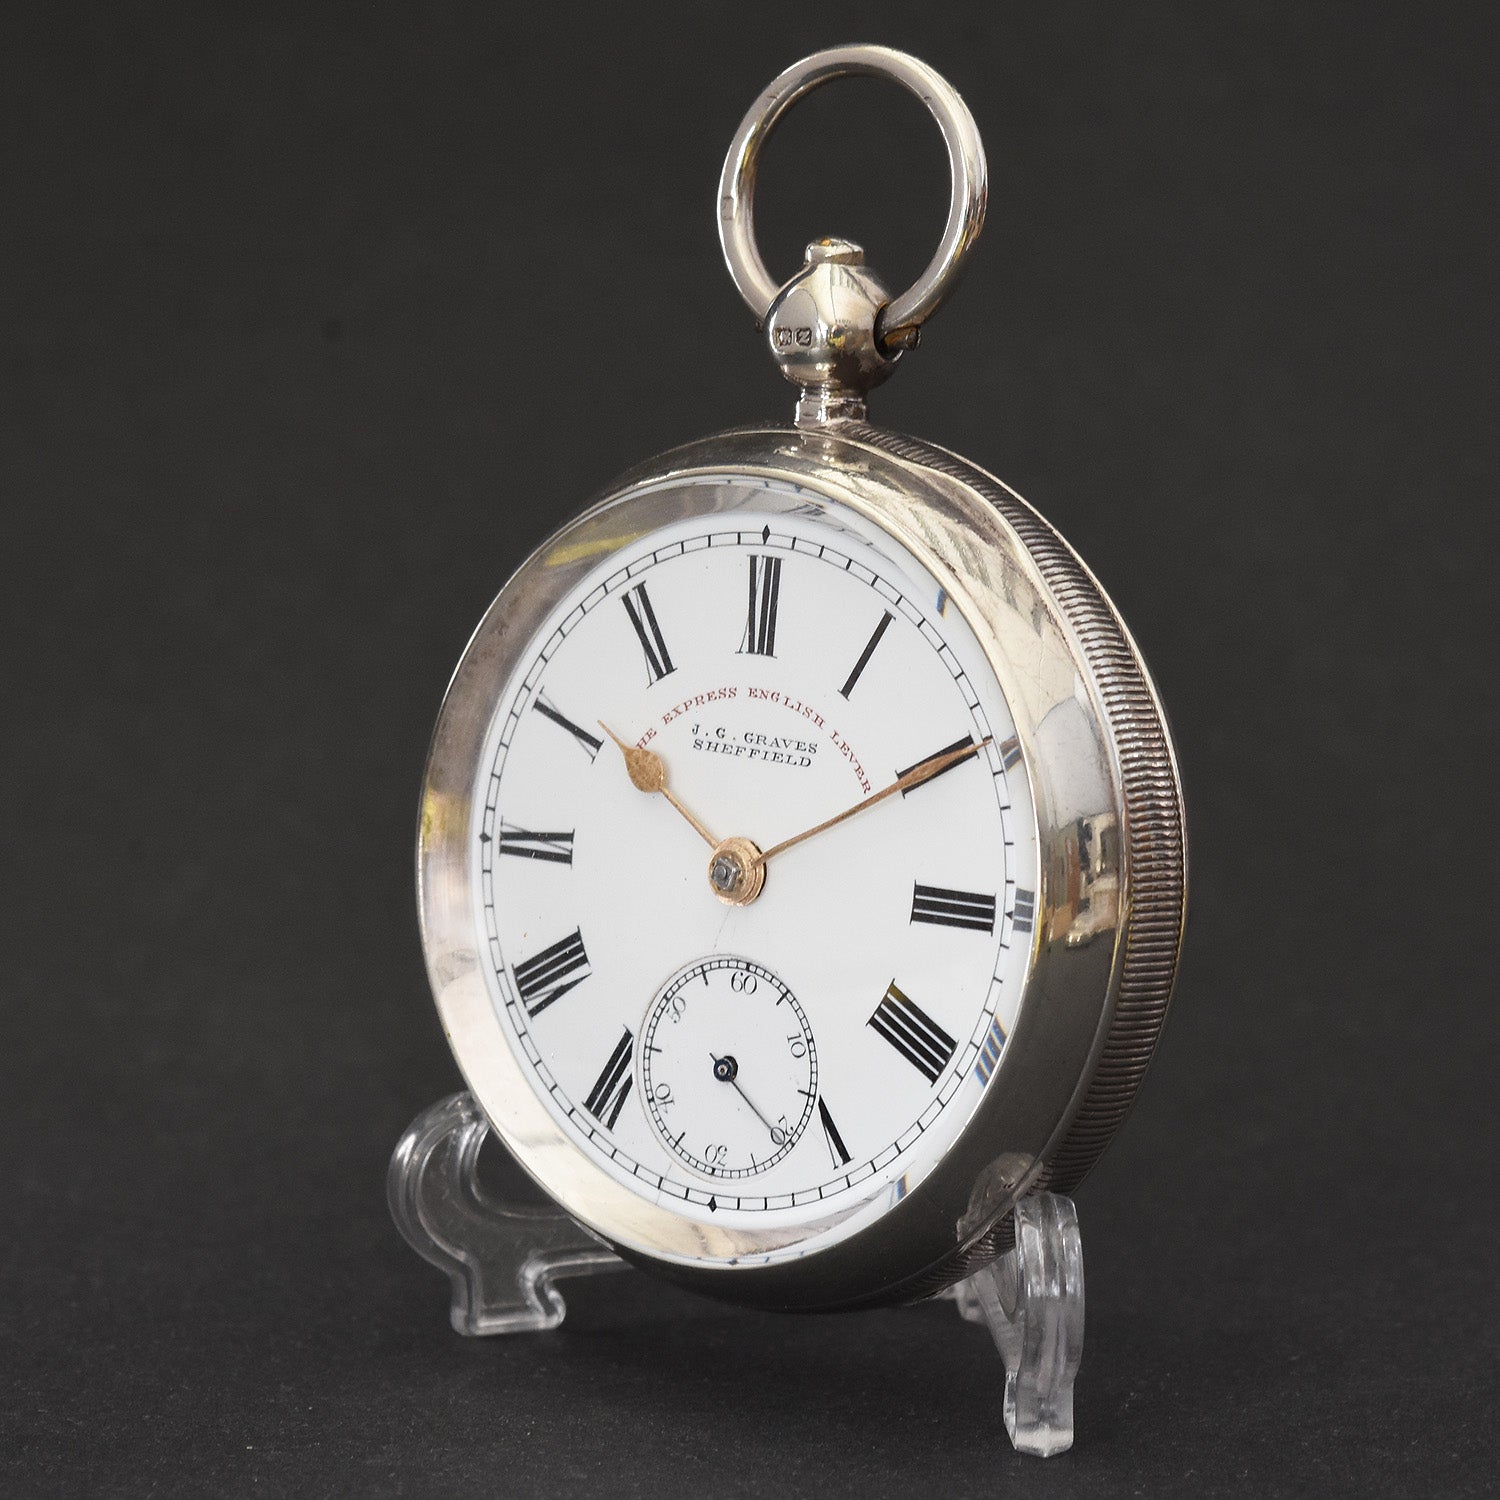 1823 J.G. GRAVES Early English KWKS Silver Pocket Watch